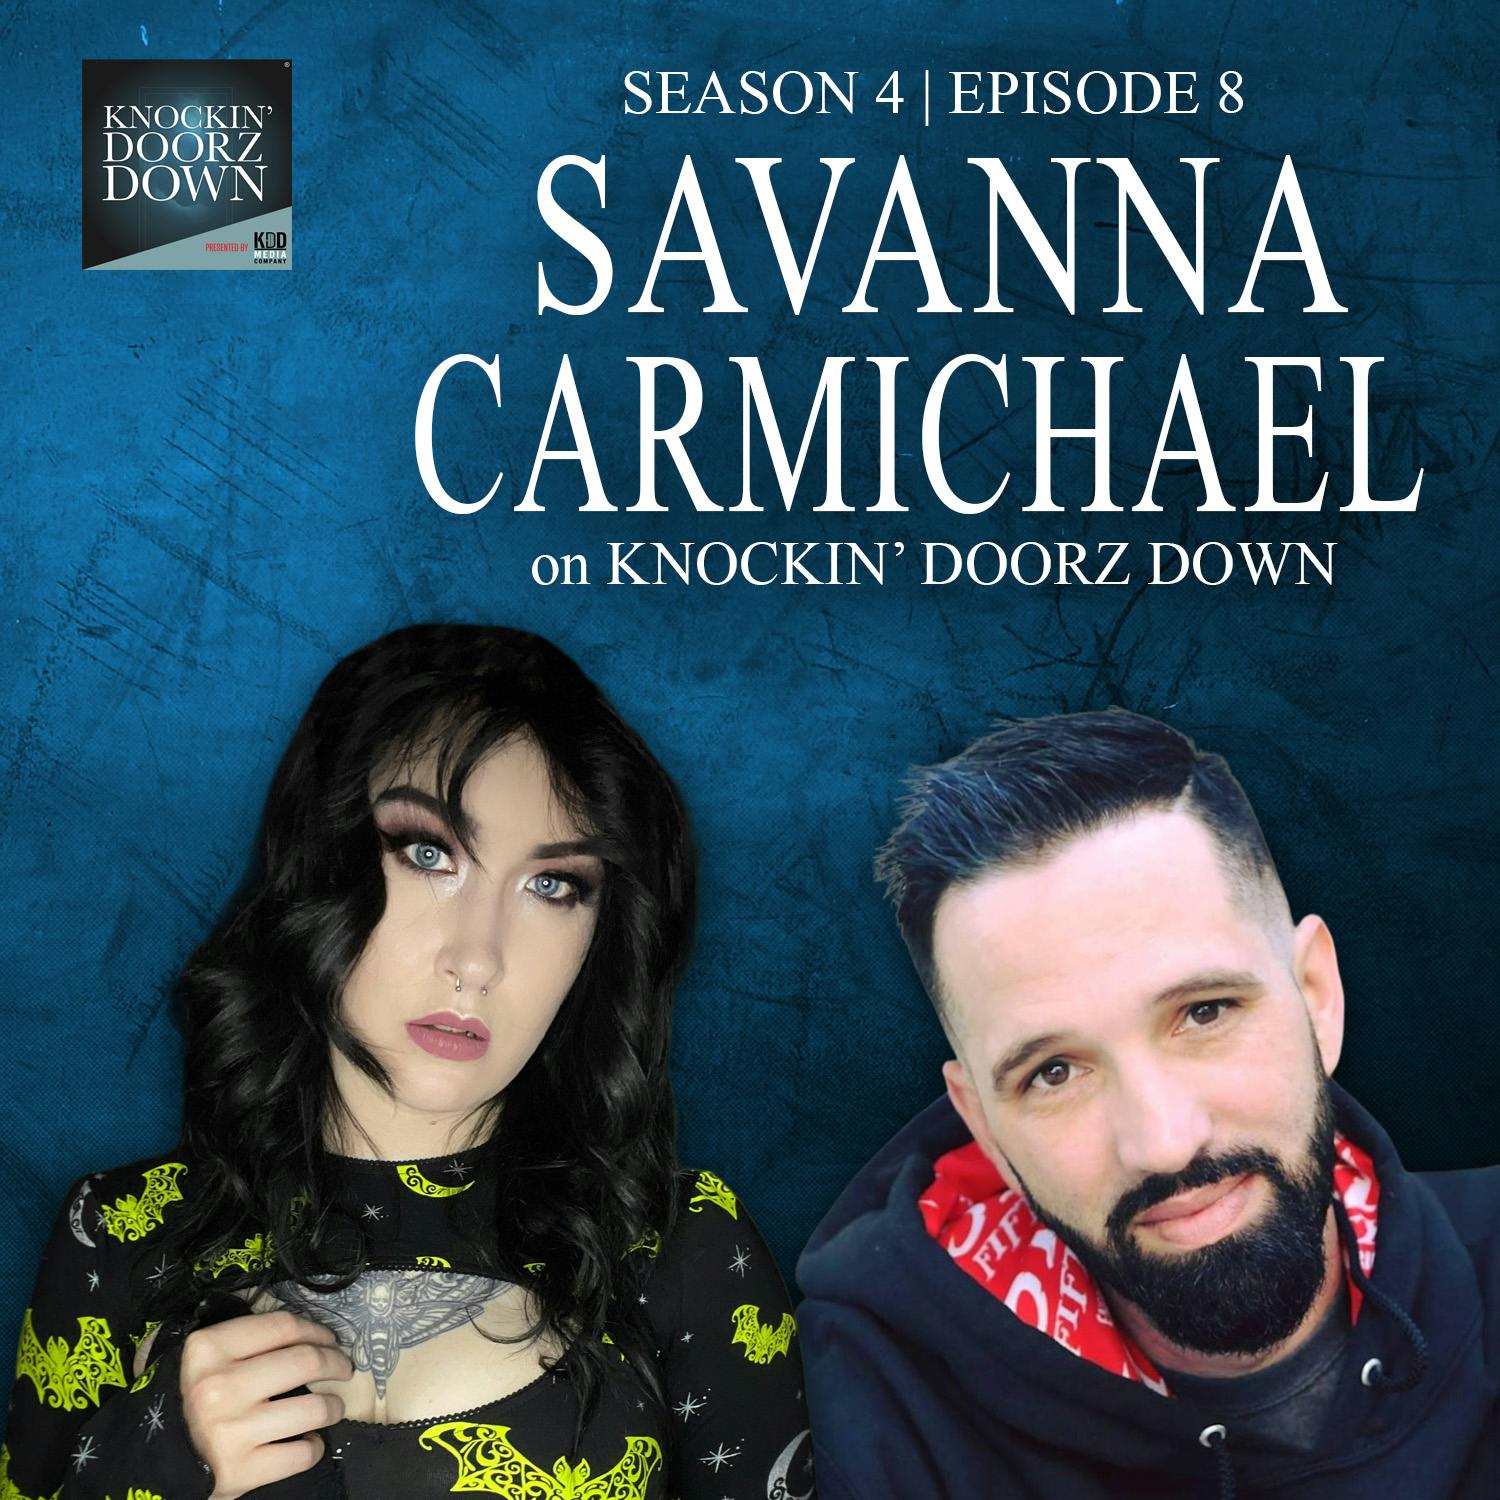 Savanna Carmichael | From Eating Disorder & Codependent Relationship To Model & Freakshow Performer